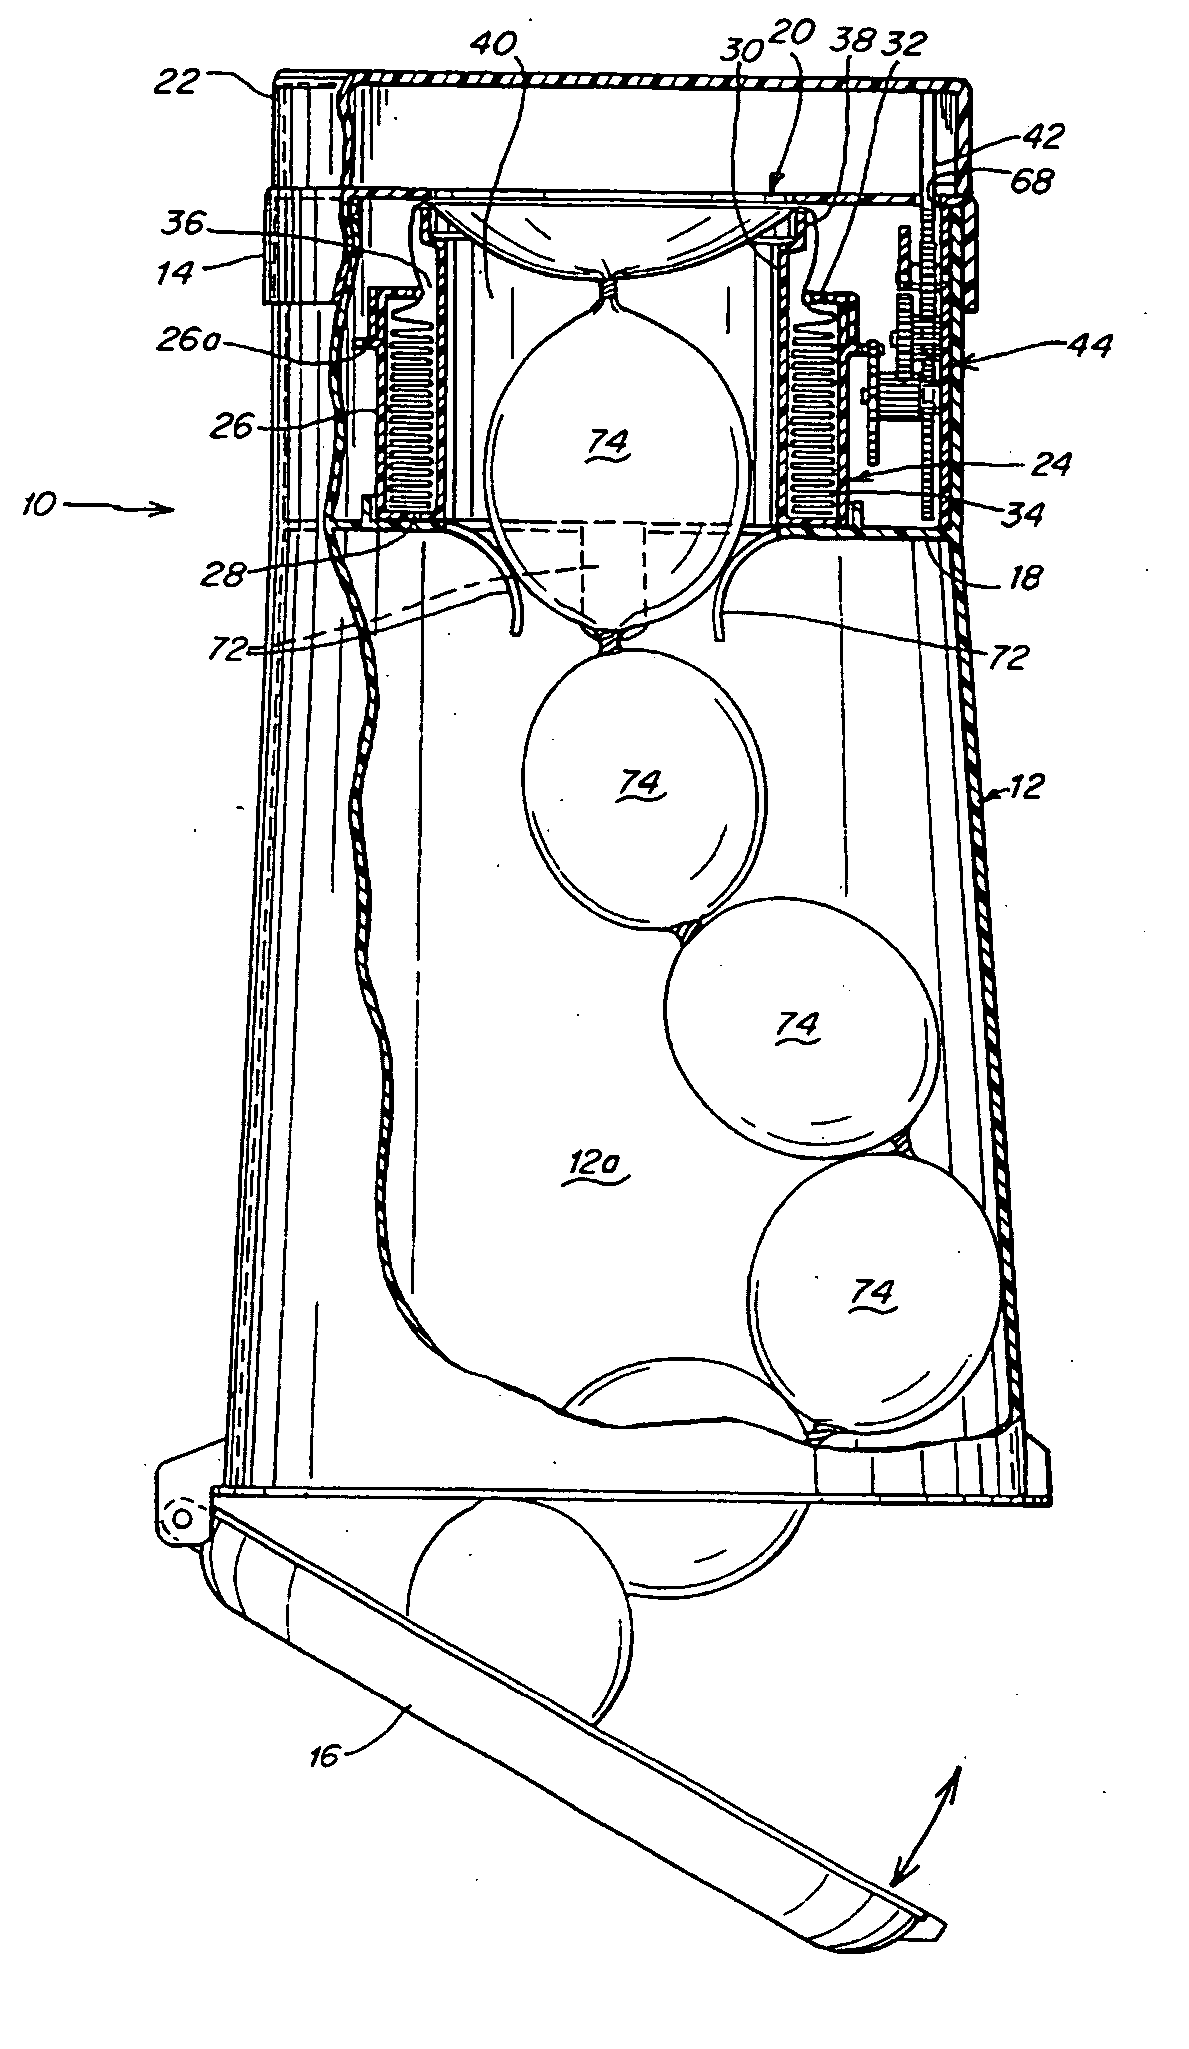 Waste disposal device including a mechanism for scoring a flexible tubing dispensed from a cartridge